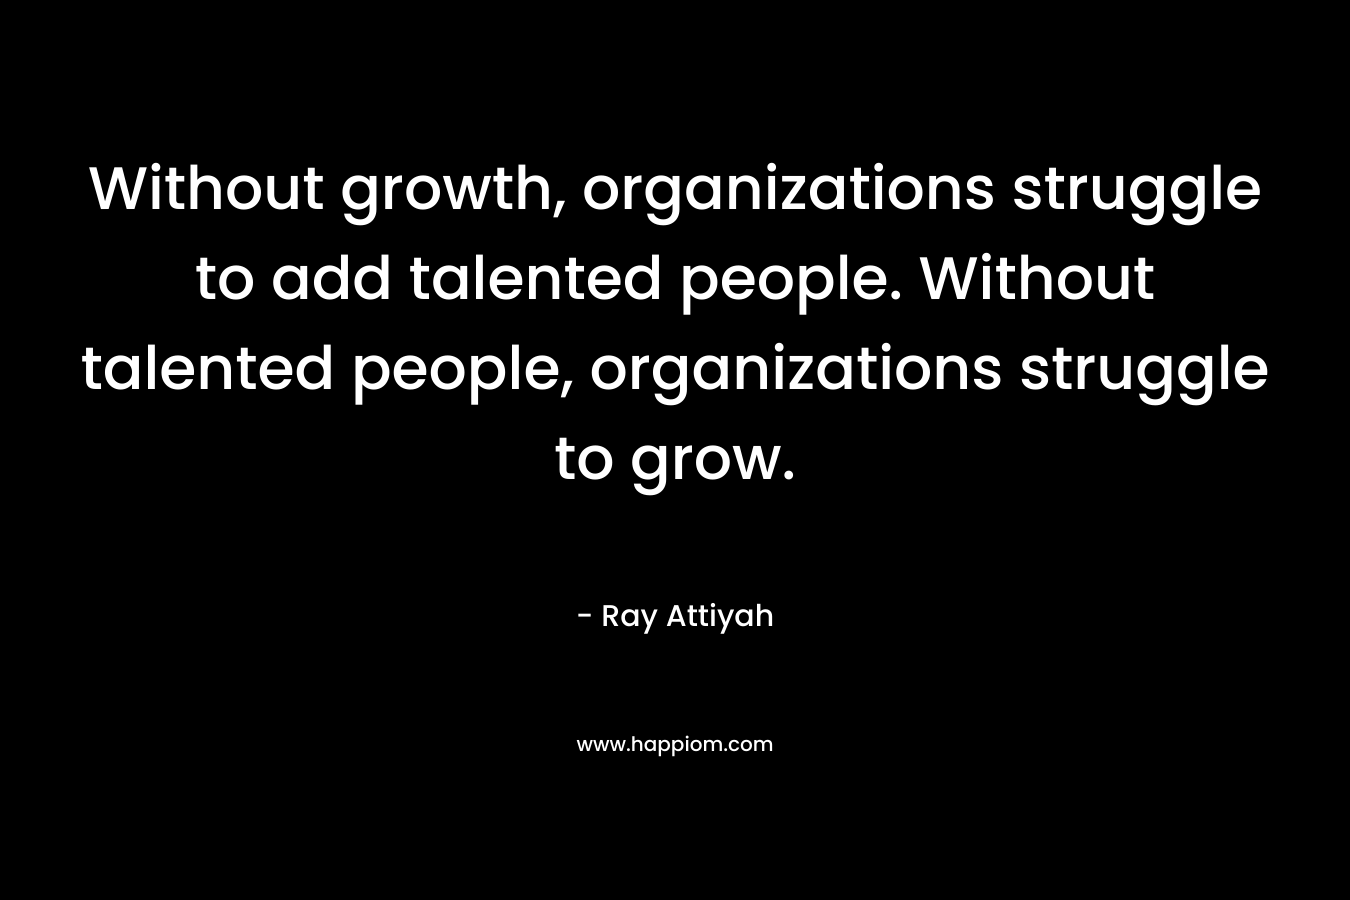 Without growth, organizations struggle to add talented people. Without talented people, organizations struggle to grow.